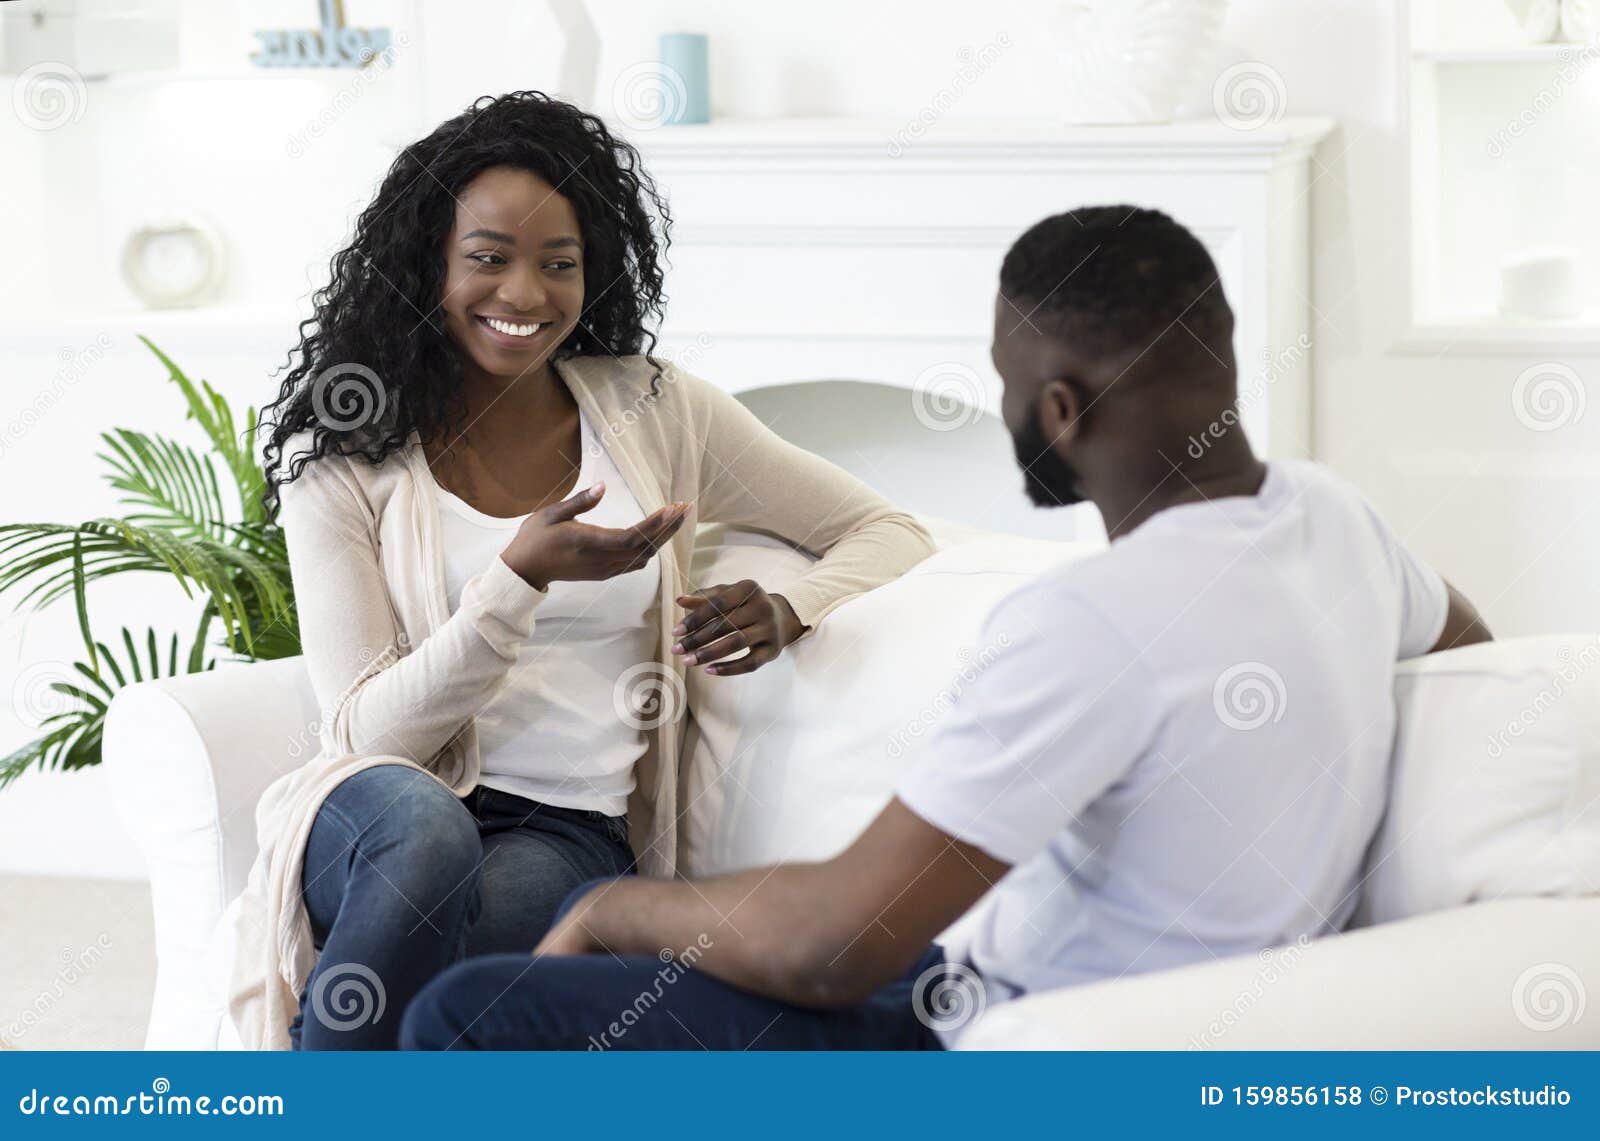 Husband and Wife Chatting Together in Living Room at Home Stoc pic photo